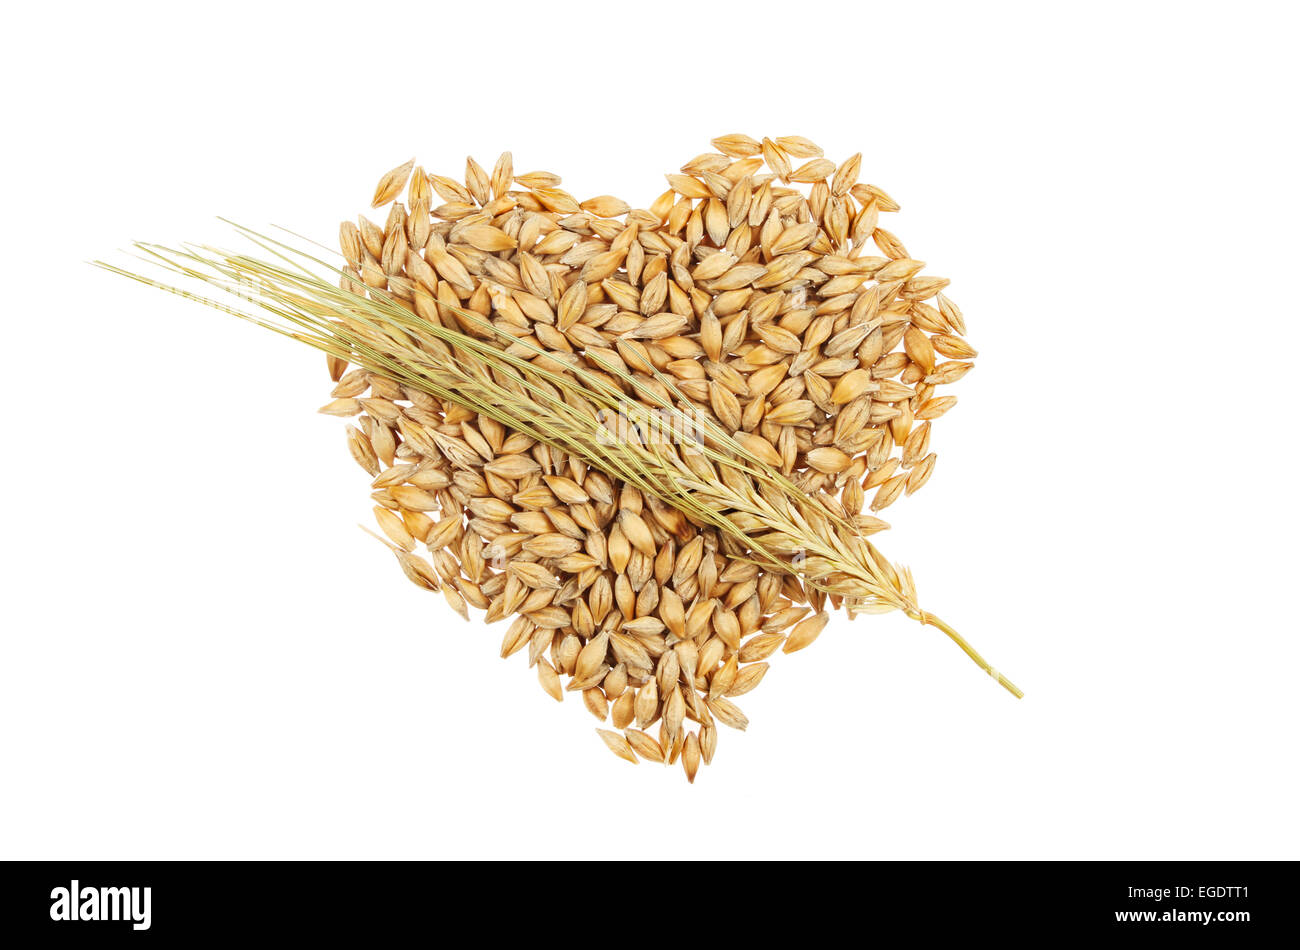 Grains of barley in the shape of a heart overlaid by an ear of barley in the manner of a Cupid’s heart isolated on white Stock Photo